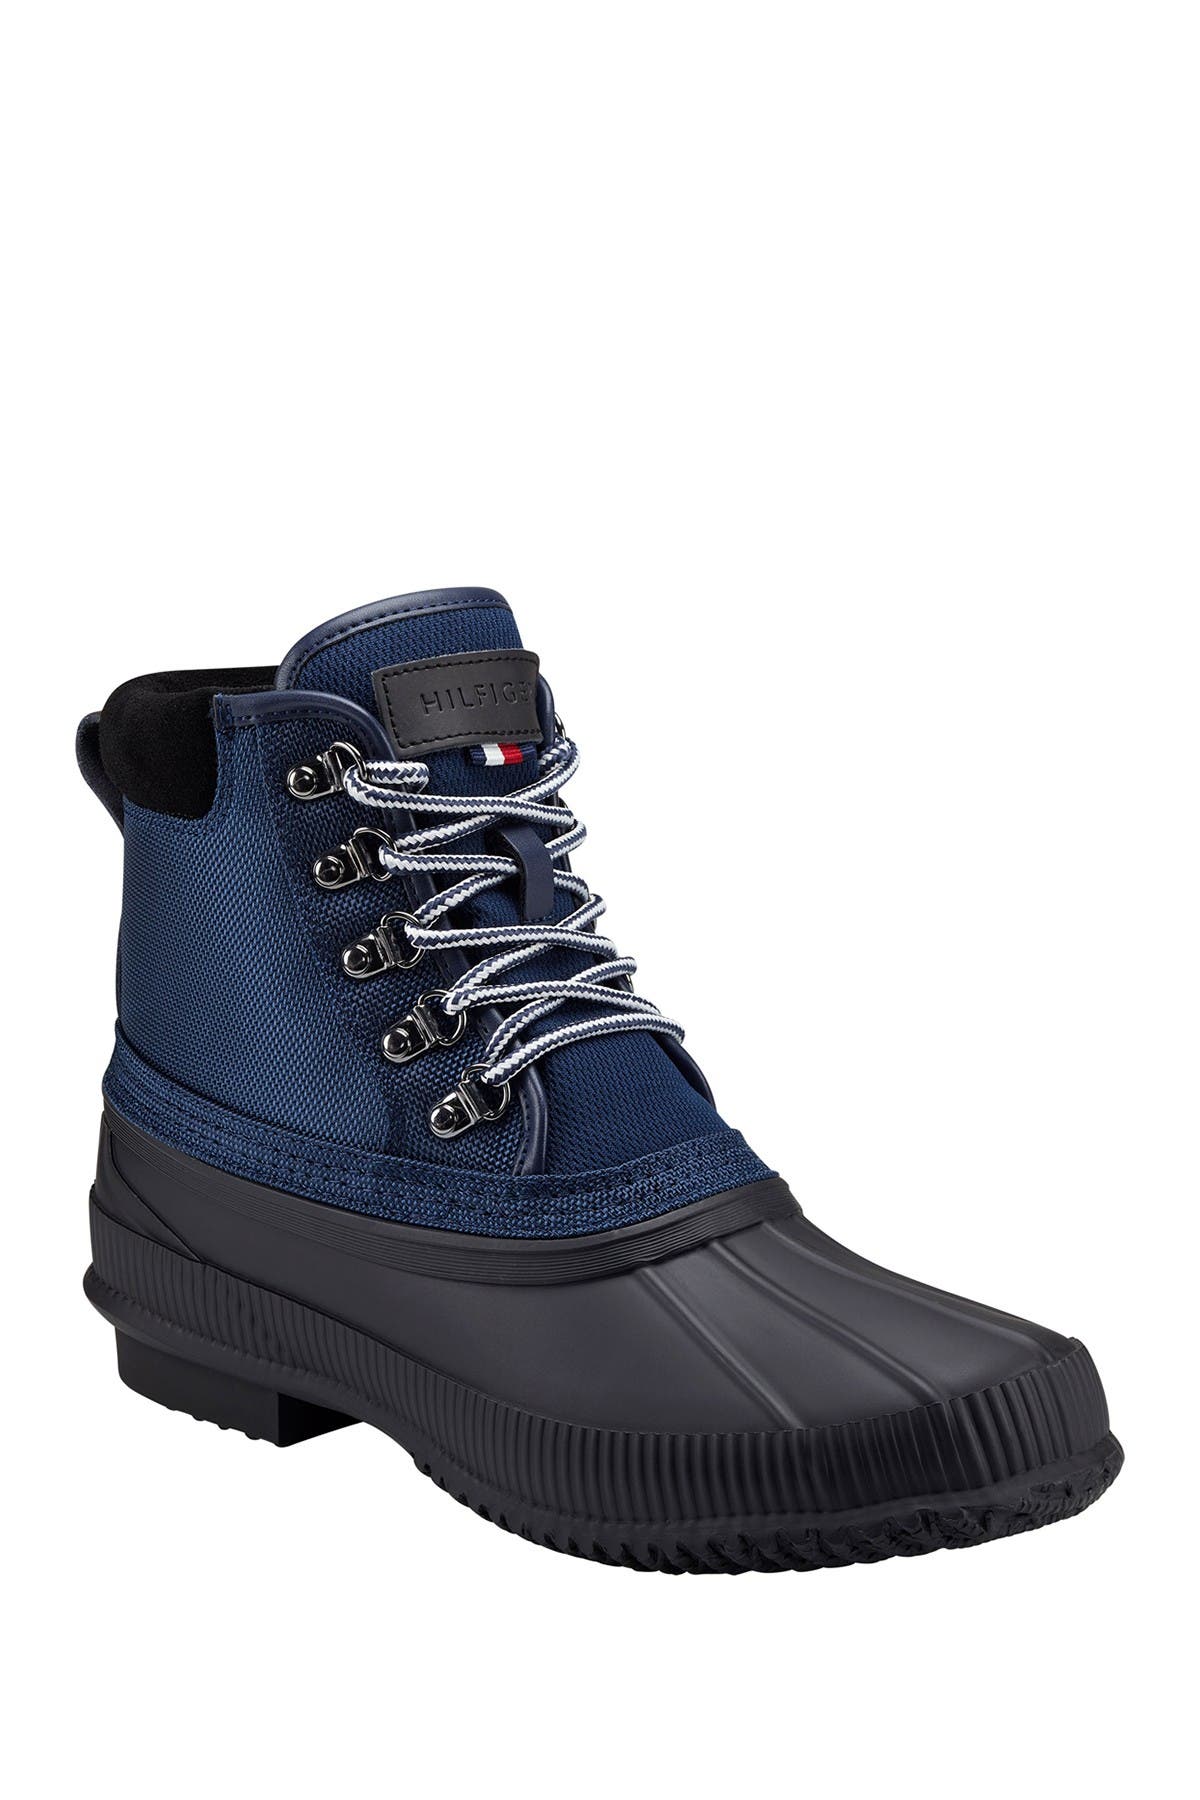 tommy hilfiger black duck boots